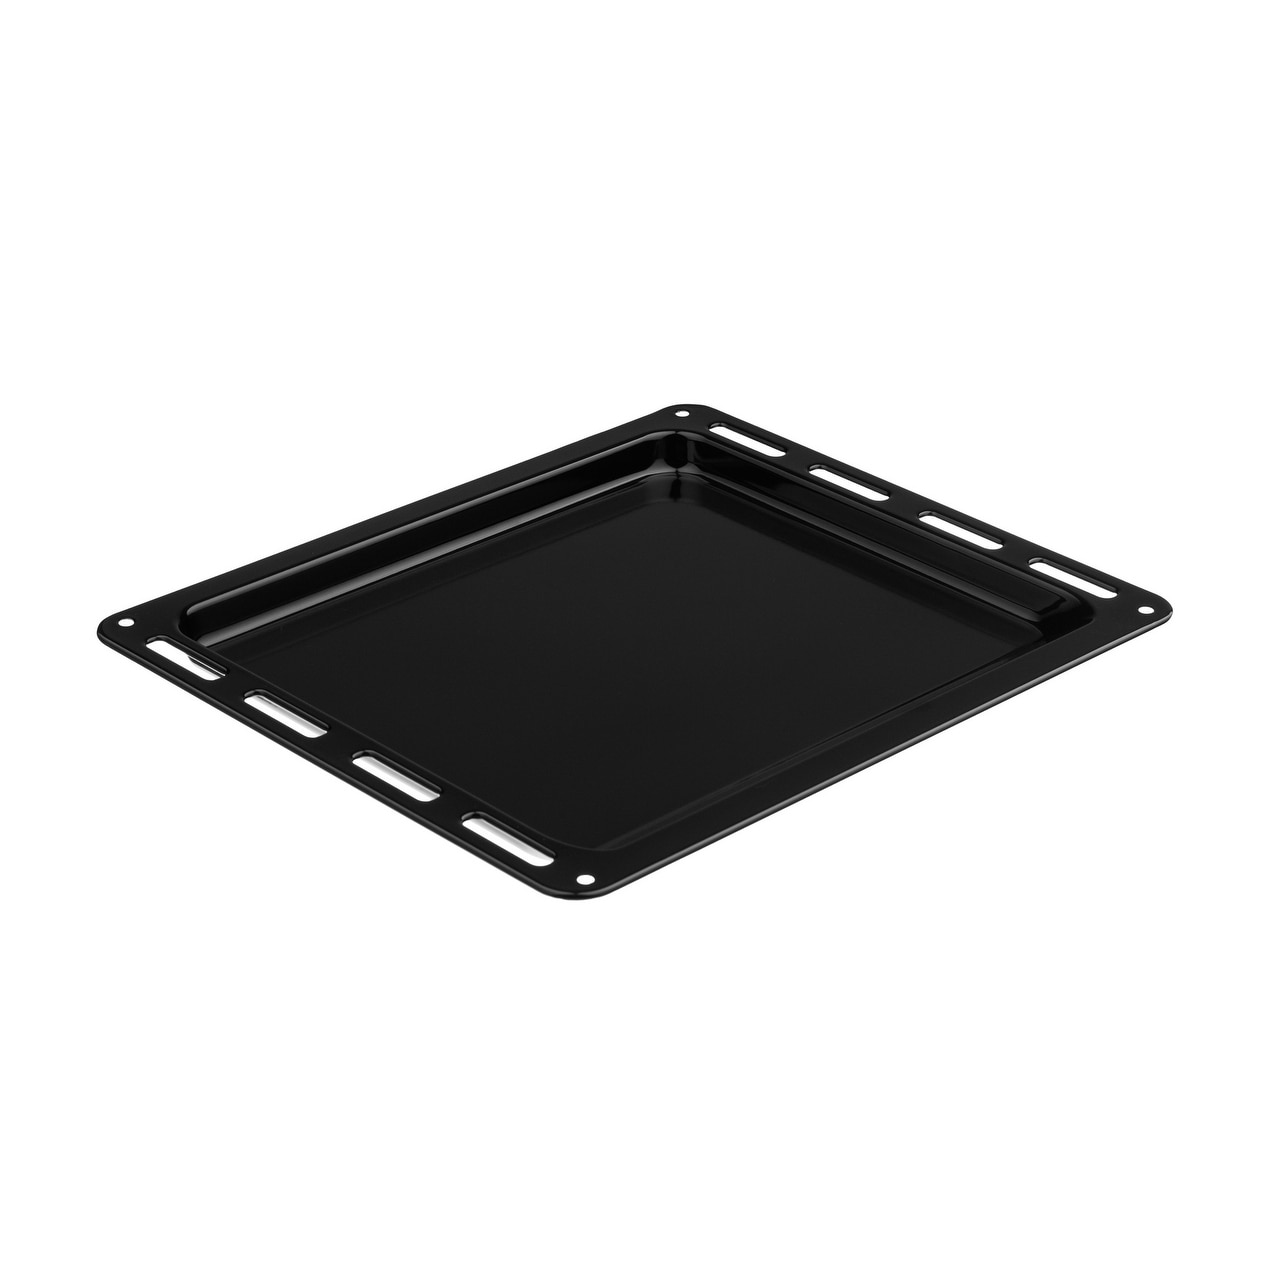 https://ak1.ostkcdn.com/images/products/is/images/direct/c8edf3ed9d9fa445047b4a4e4b4dcf38e98248a1/Black-Oven-Broiling-Pan-compatible-with-Empava-24--inch-Single-Wall-Oven.jpg